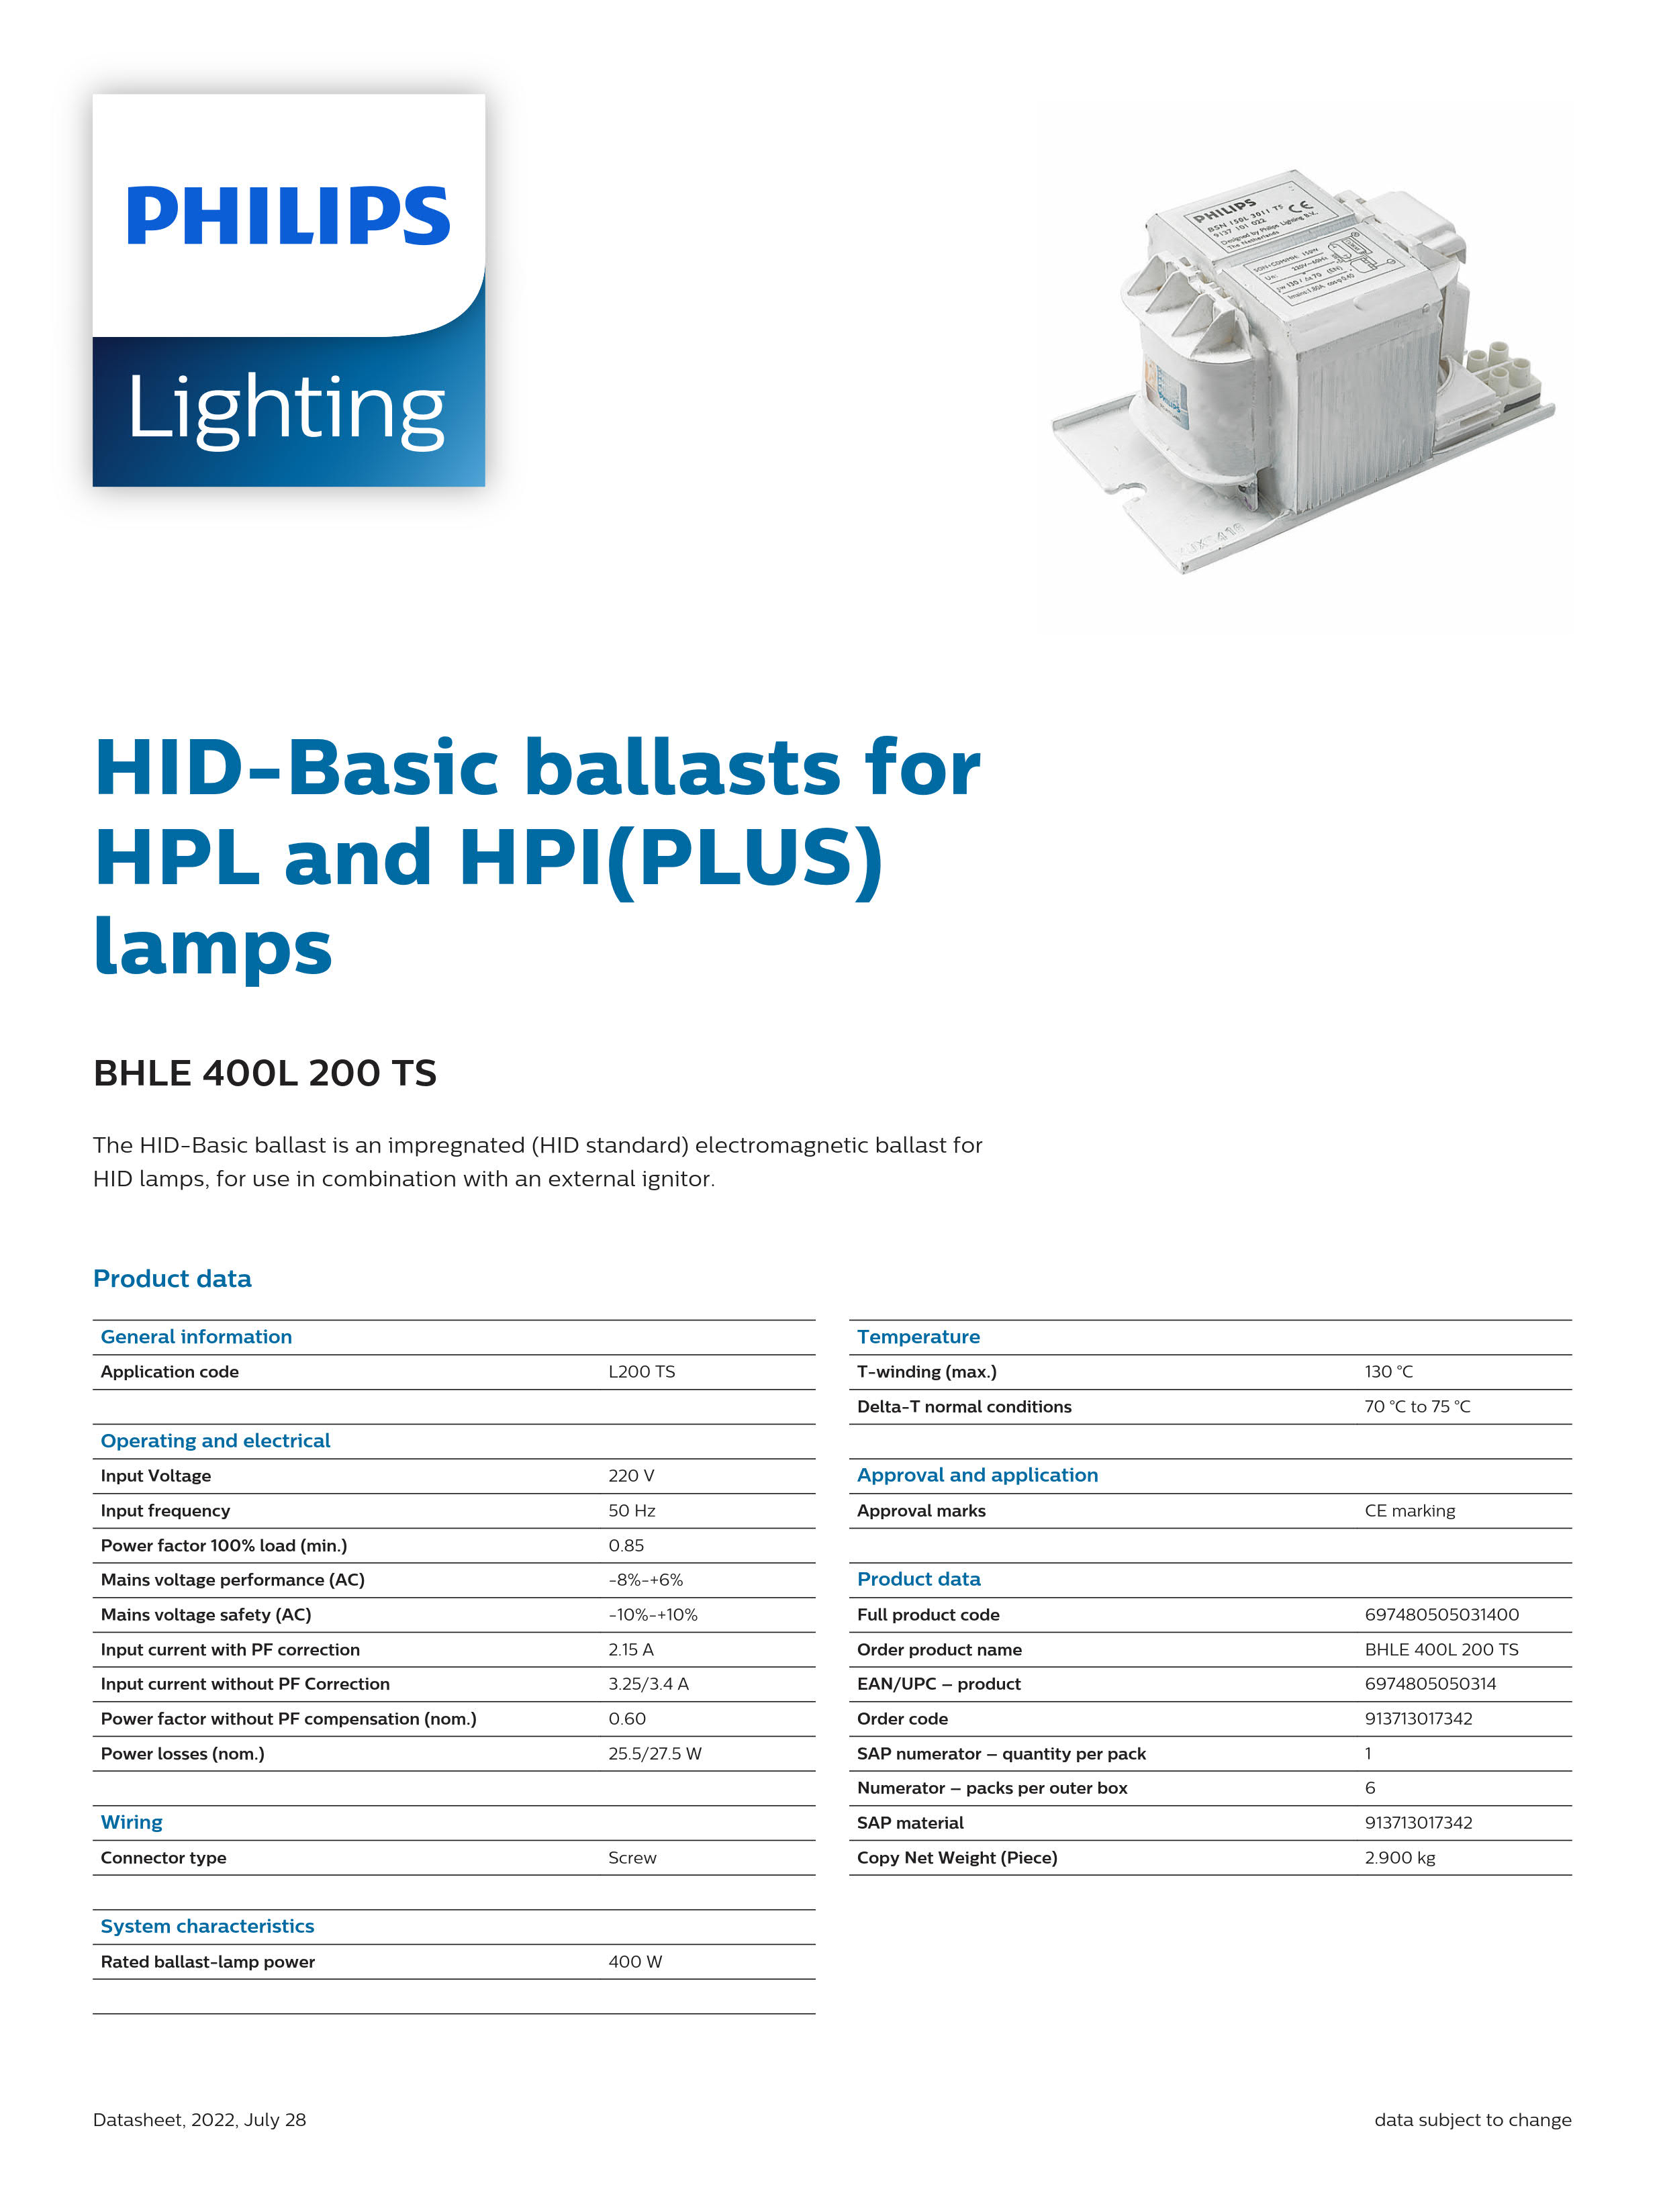 PHILIPS HID-Basic Ballasts for HPL and HPI(PLUS) Lamps BHLE 400L 200 TS 913713017342